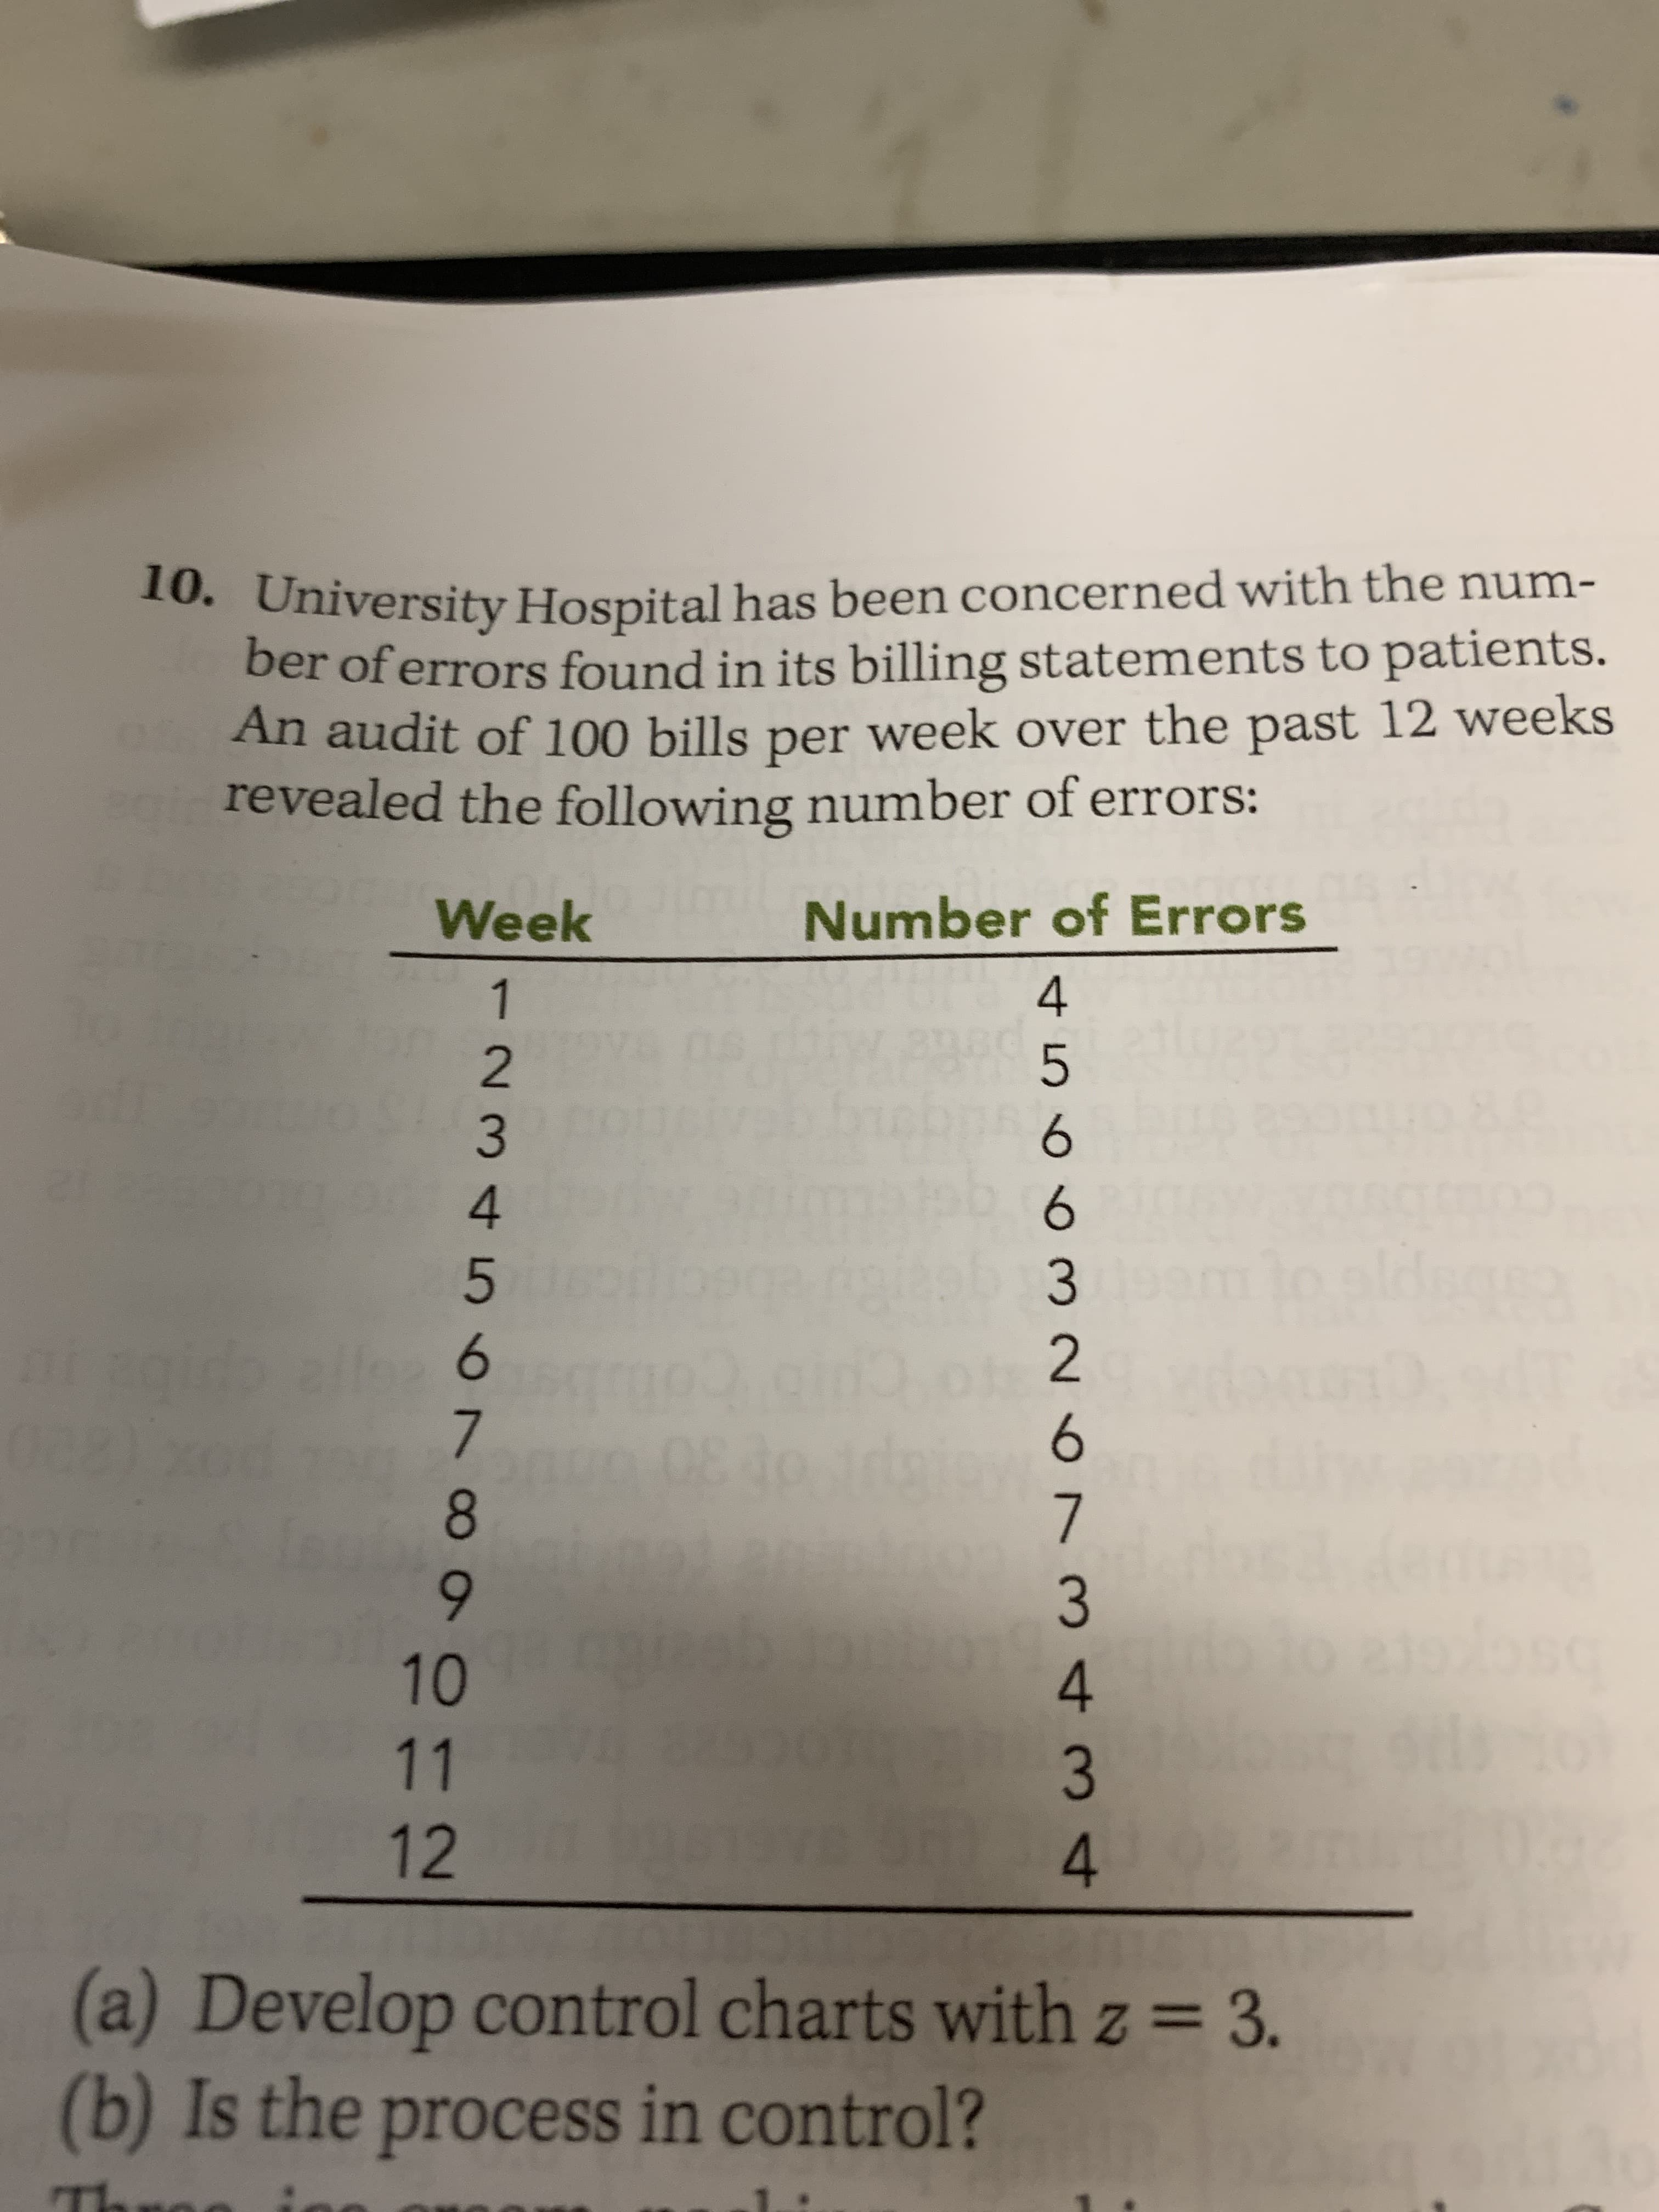 10. University Hospital has been concerned with the num-
ber of errors found in its billing statements to patients.
OAn audit of 100 bills per week over the past 12 weeks
revealed the following number of errors:
Week
Number of Errors
alloe
8.
11
12
(a) Develop control charts with z = 3.
(b) Is the process in control?
Th
4 566 3267 3434
12345670 90
